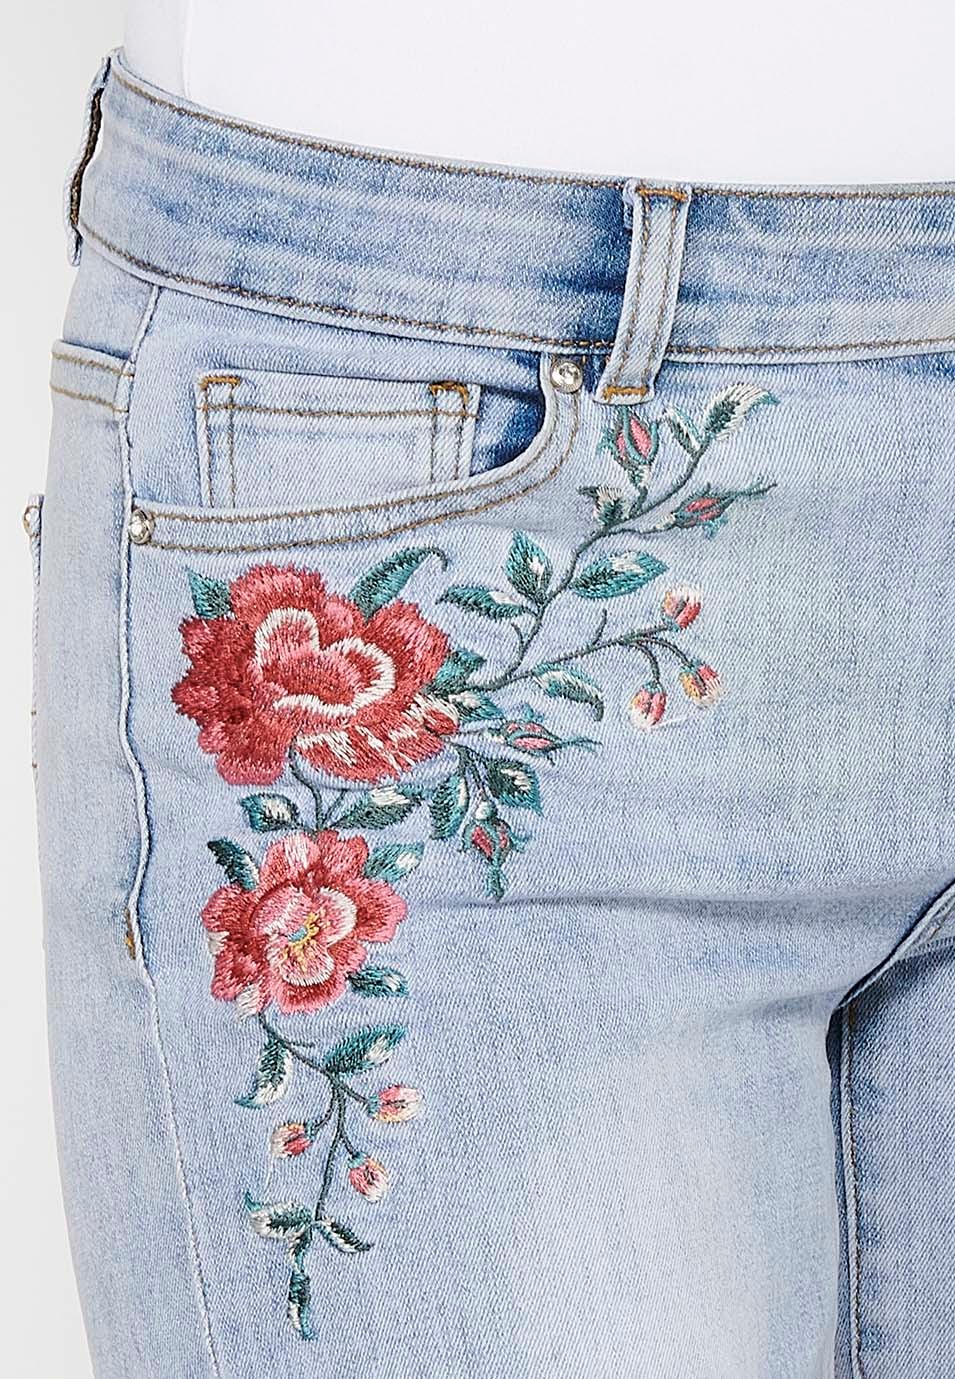 Denim shorts with front zipper and button closure and front floral embroidered details with five pockets, one blue pocket pocket for women 9